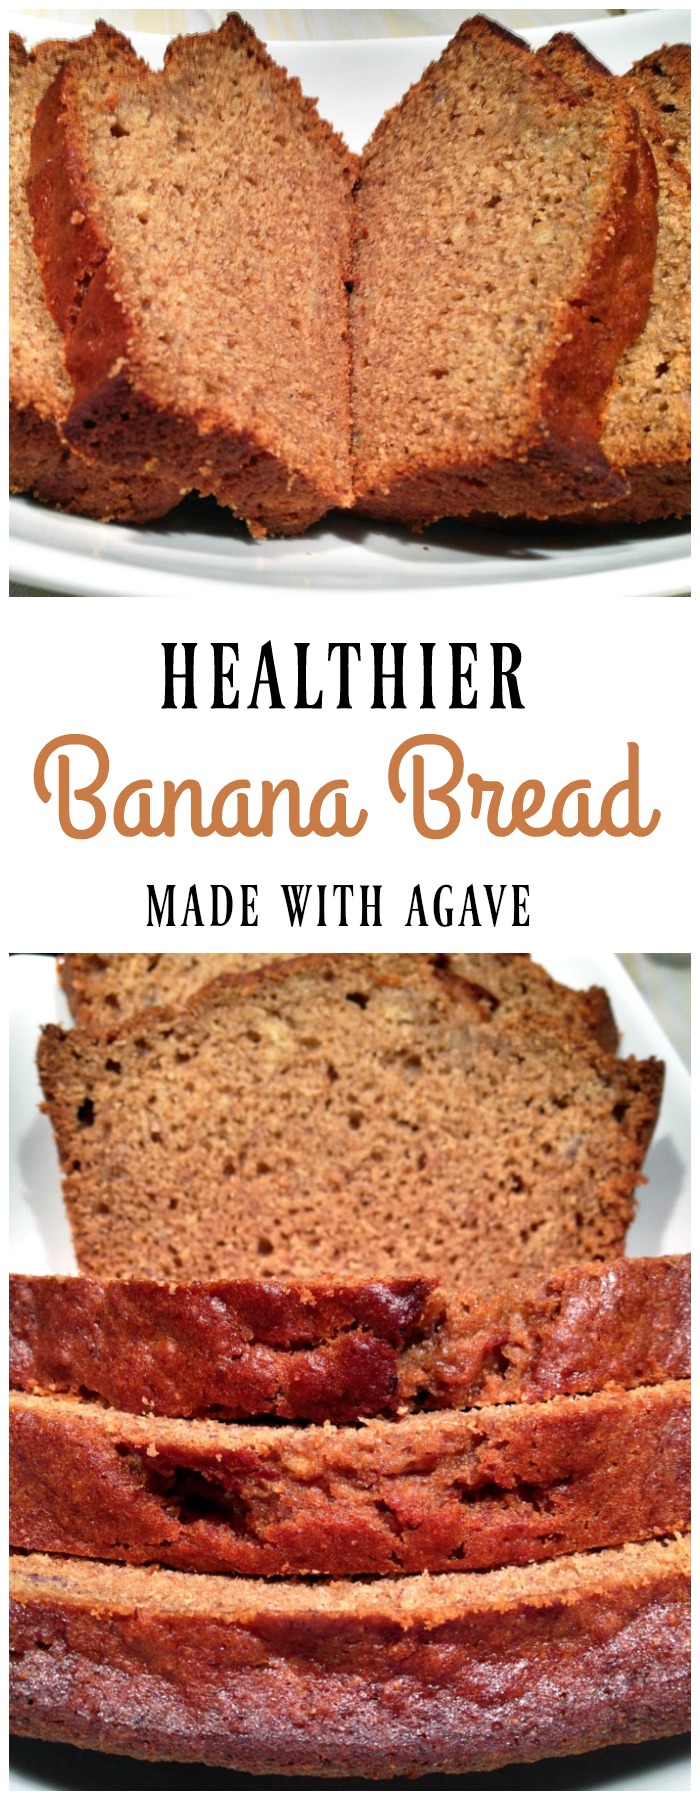 Healthier banana bread, made with agave nectar, tastes just as moist and delicious as banana bread made with traditional sugar. This banana bread recipe is perfect for creating a healthier snack or dessert.